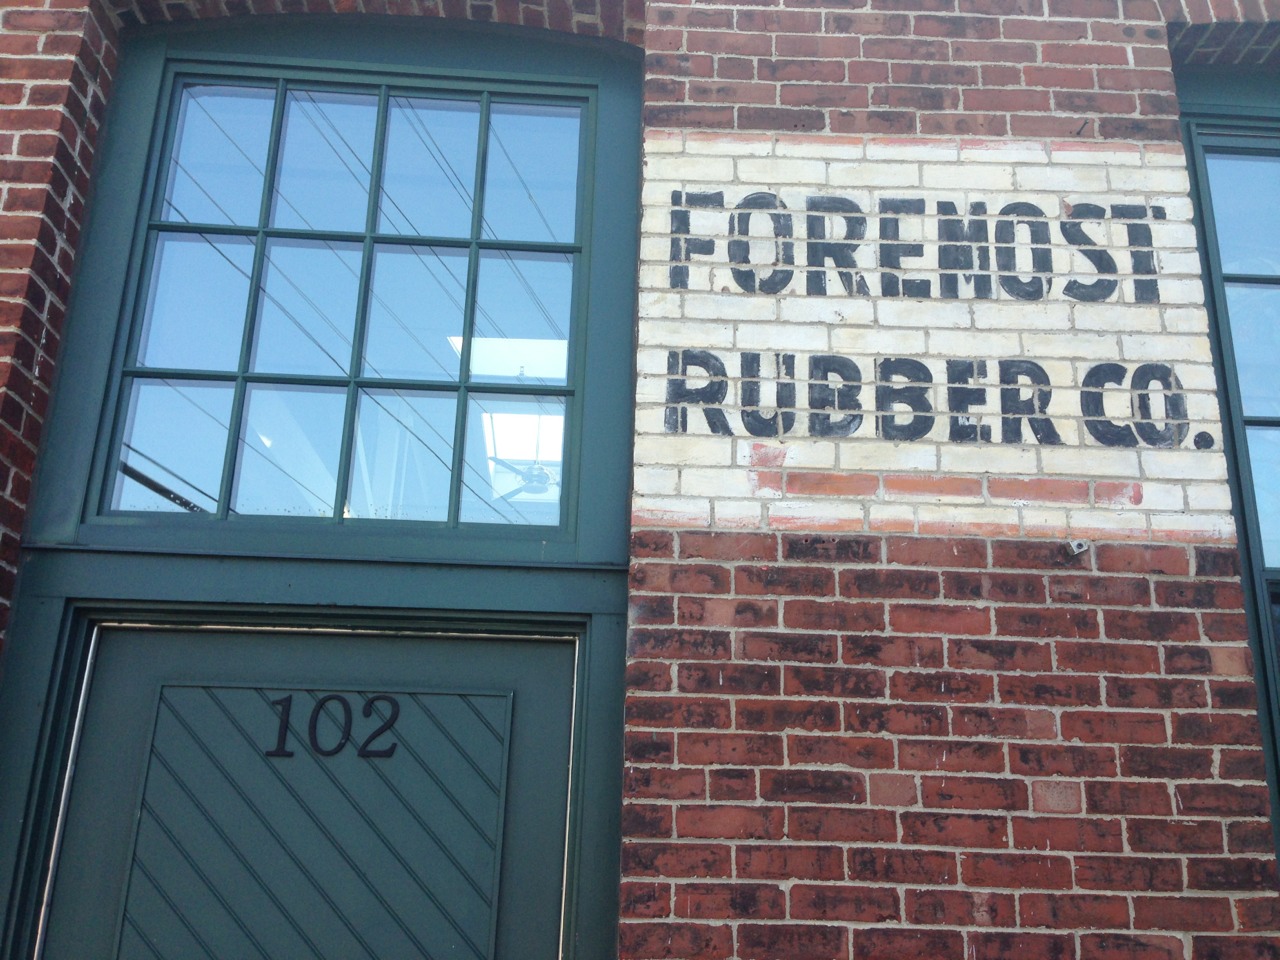 "FOREMOST RUBBER CO."